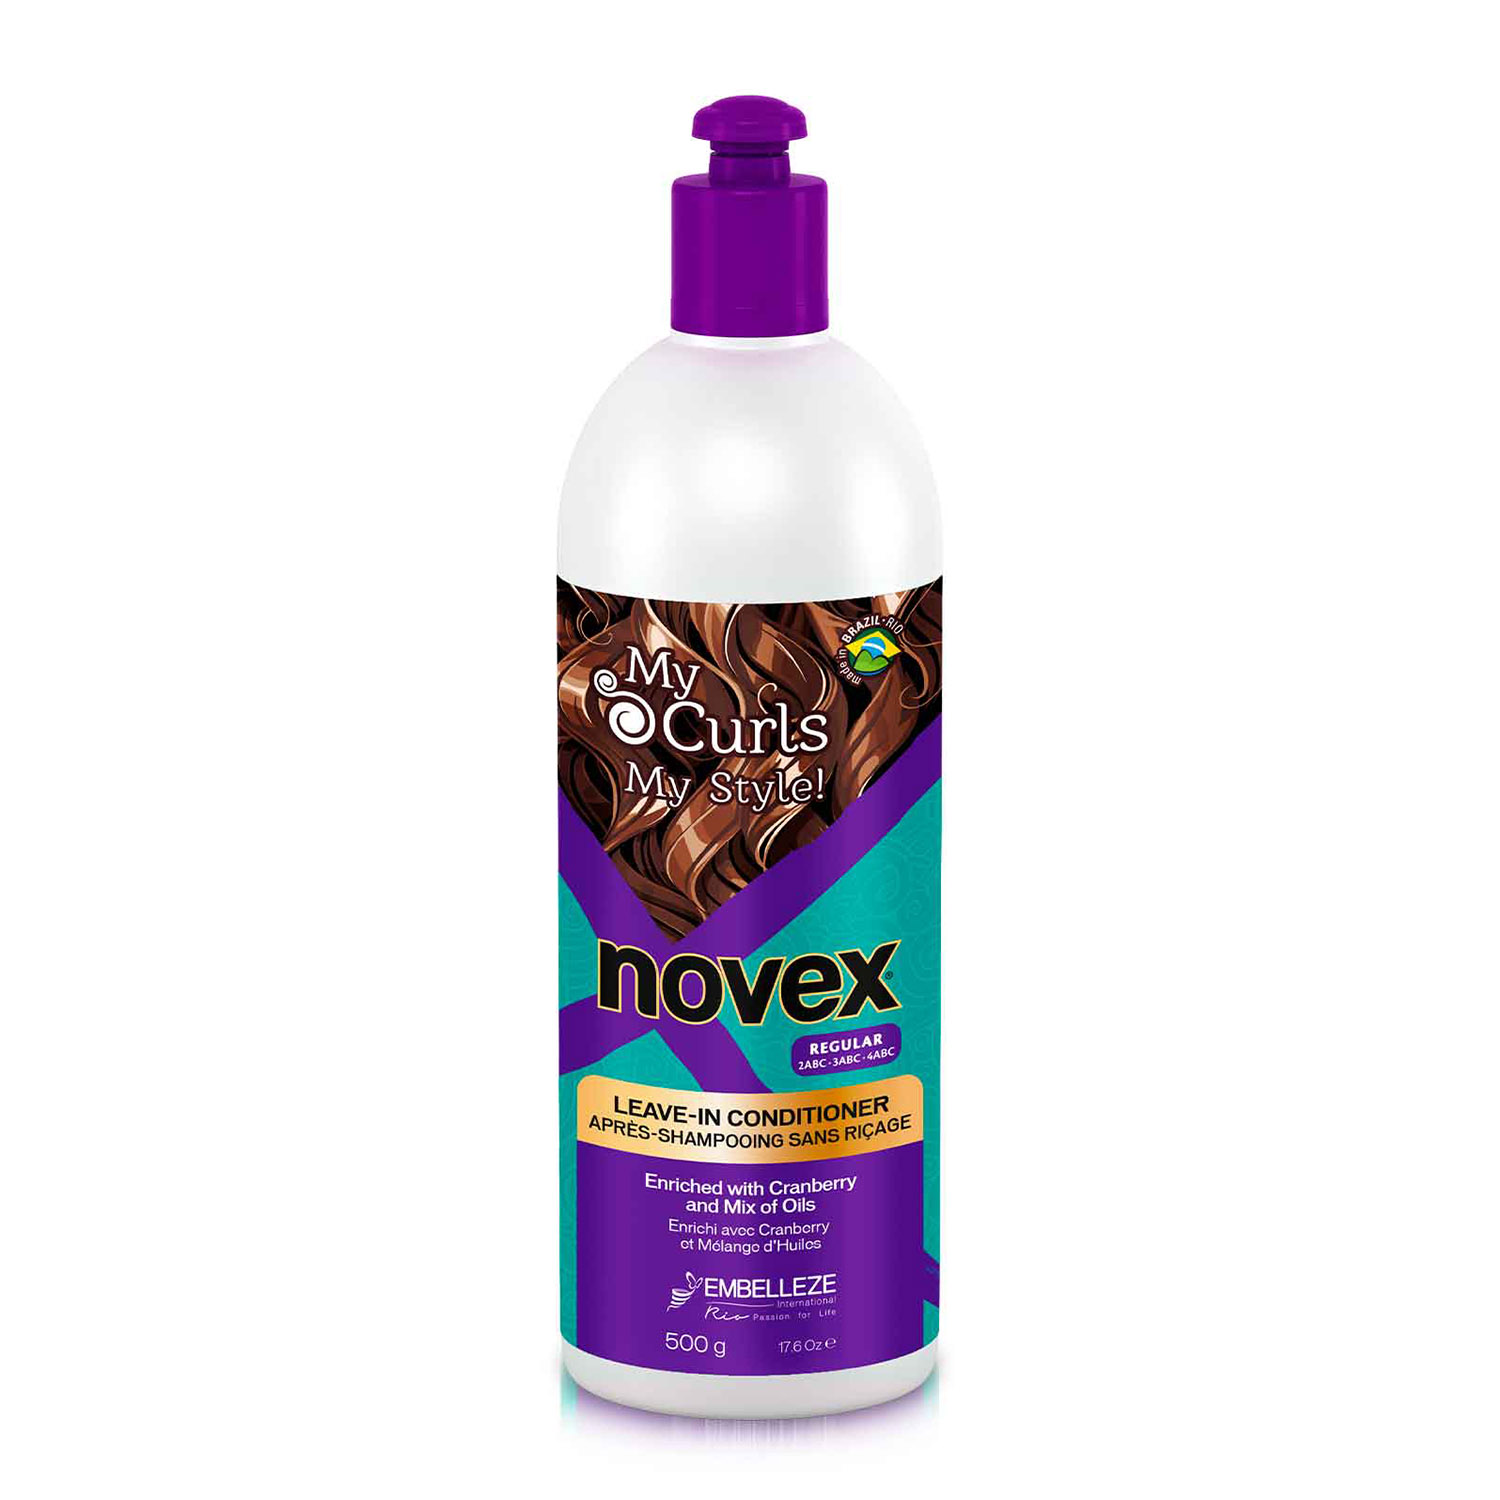 NOVEX My Curls Leave-In Conditioner